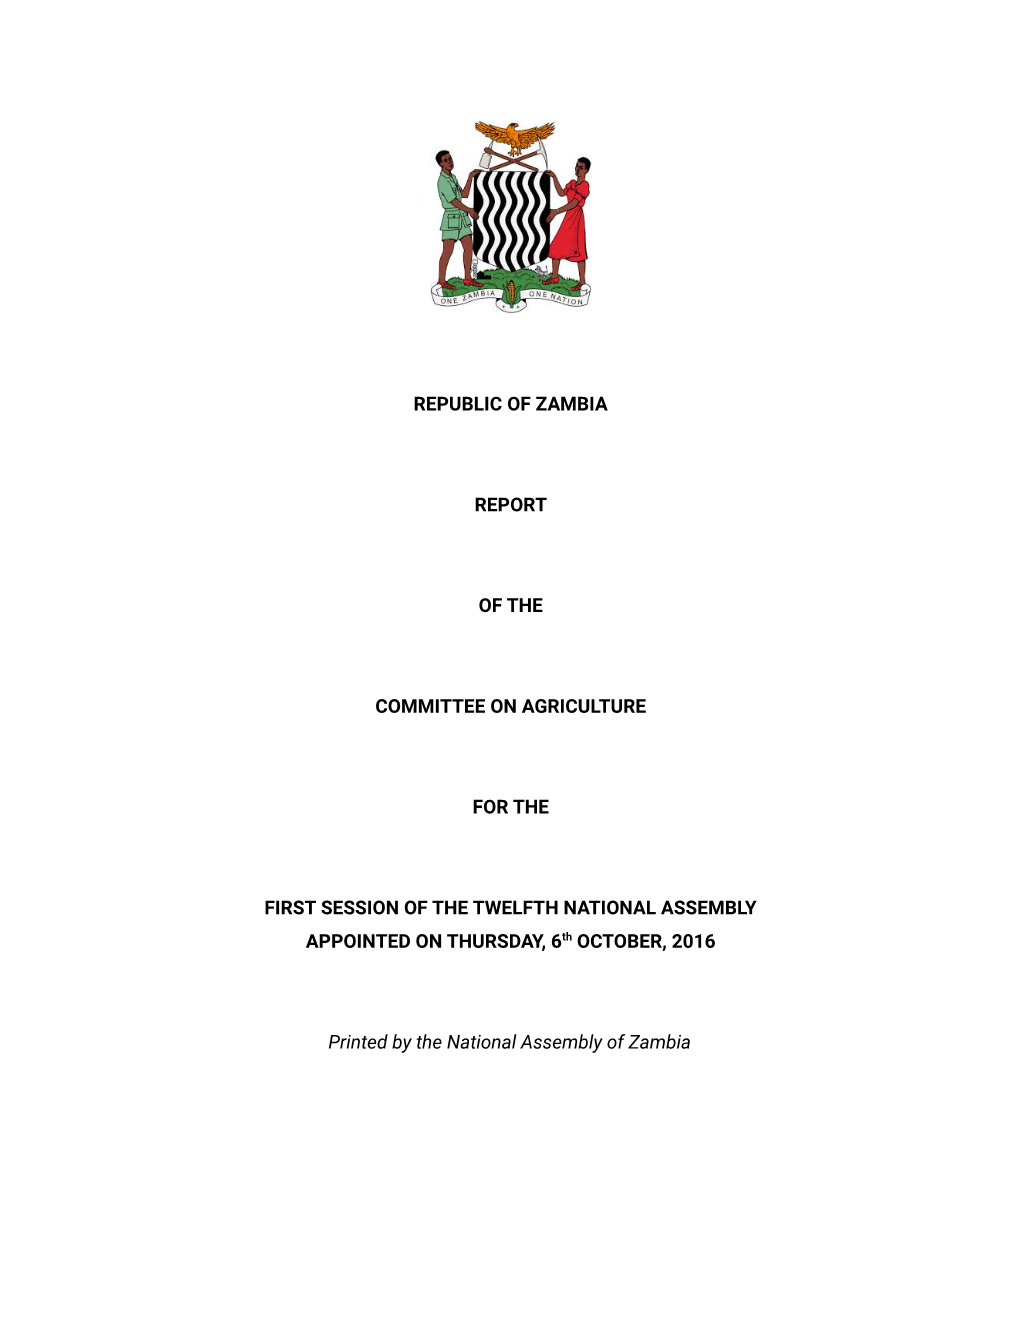 REPORT for the COMMITTEE on AGRICULTURE.Pdf